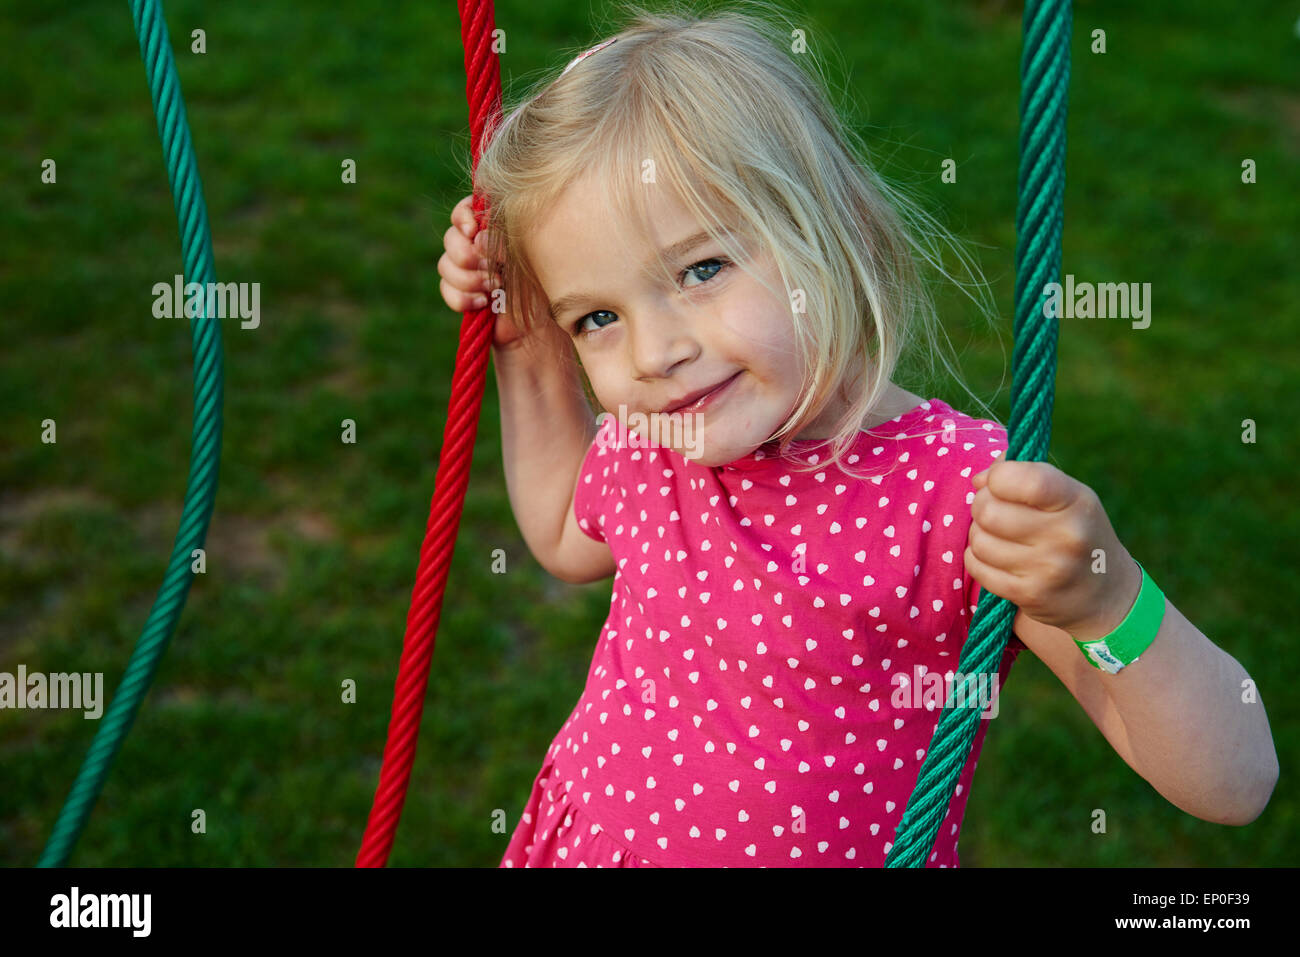 Portrait of child young blond girl climbing ropes on playground Stock Photo